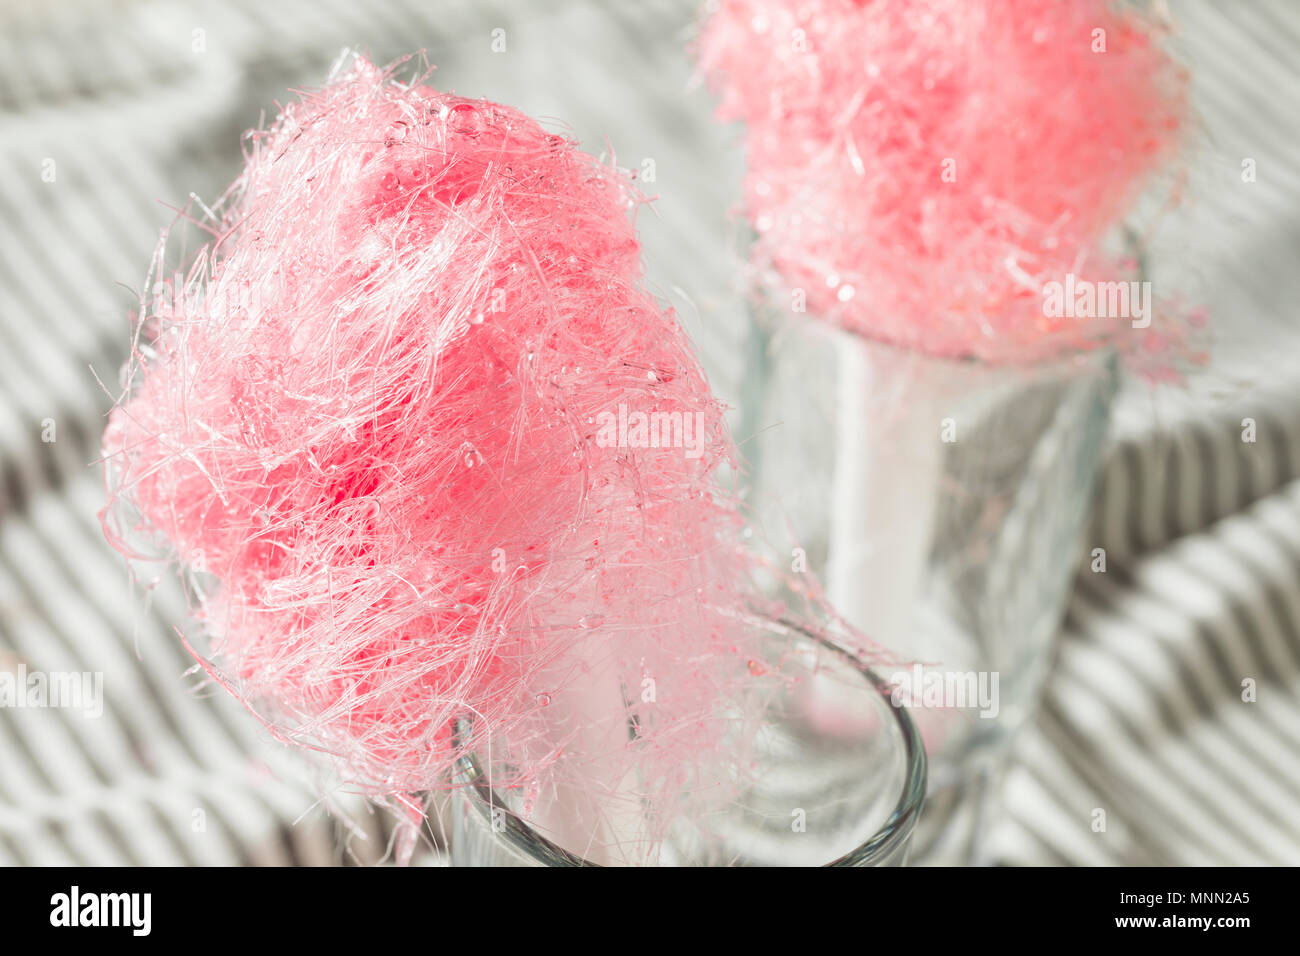 Sugary Pink Homemade Cotton Candy Floss on a Stick Stock Photo